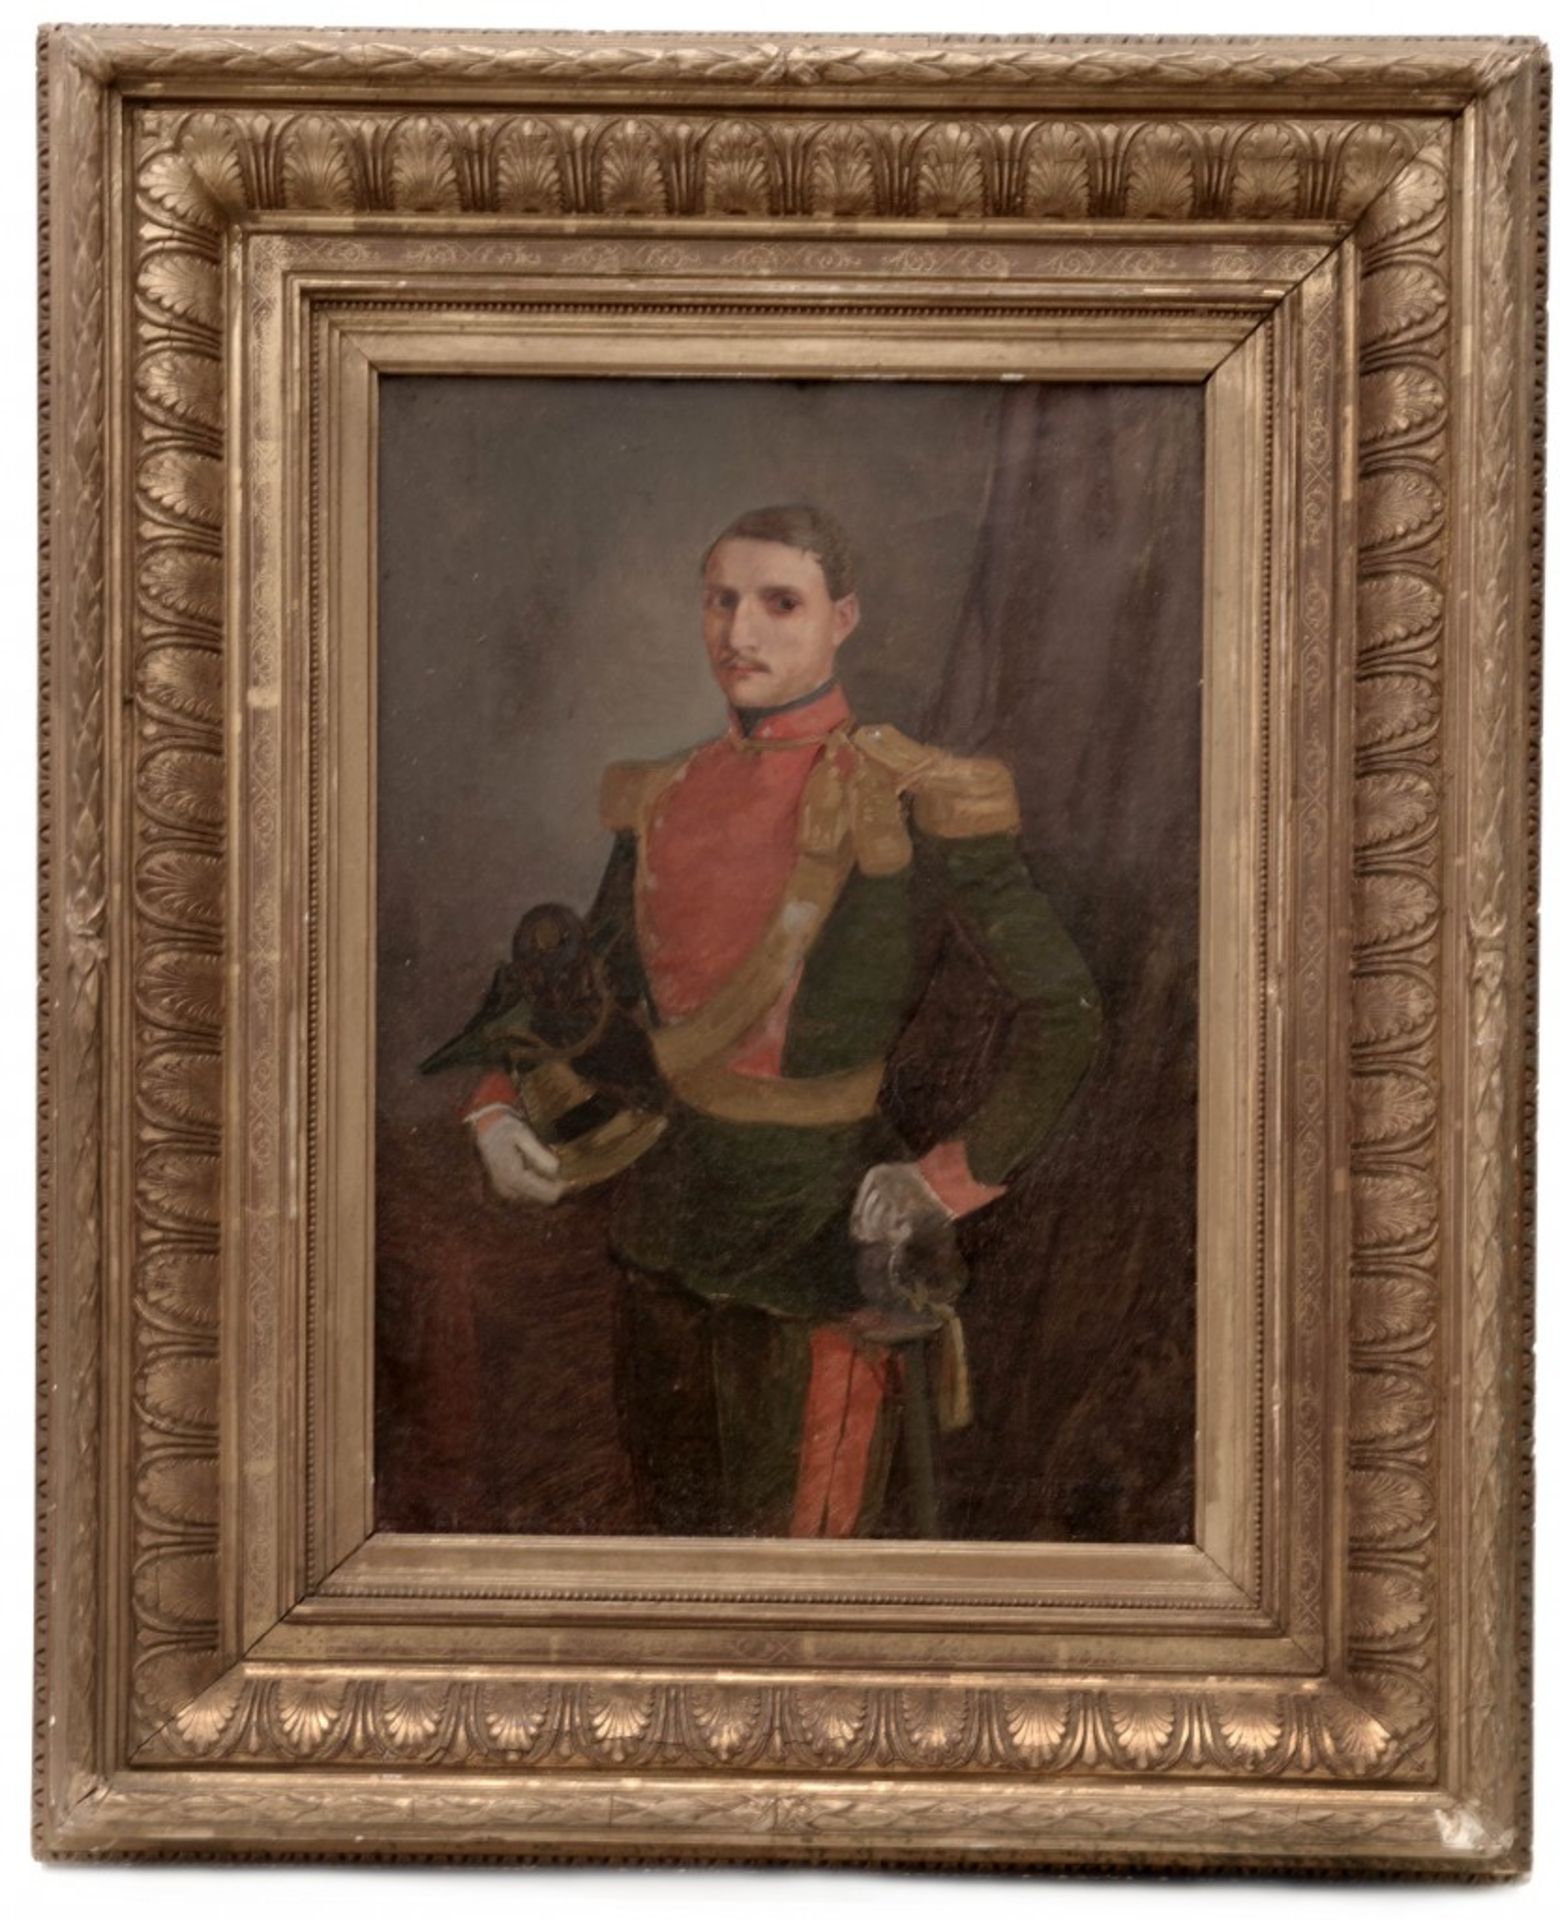 A Portrait of Uhlan Officer (Medvey Lajos) by Hans Bitterlich